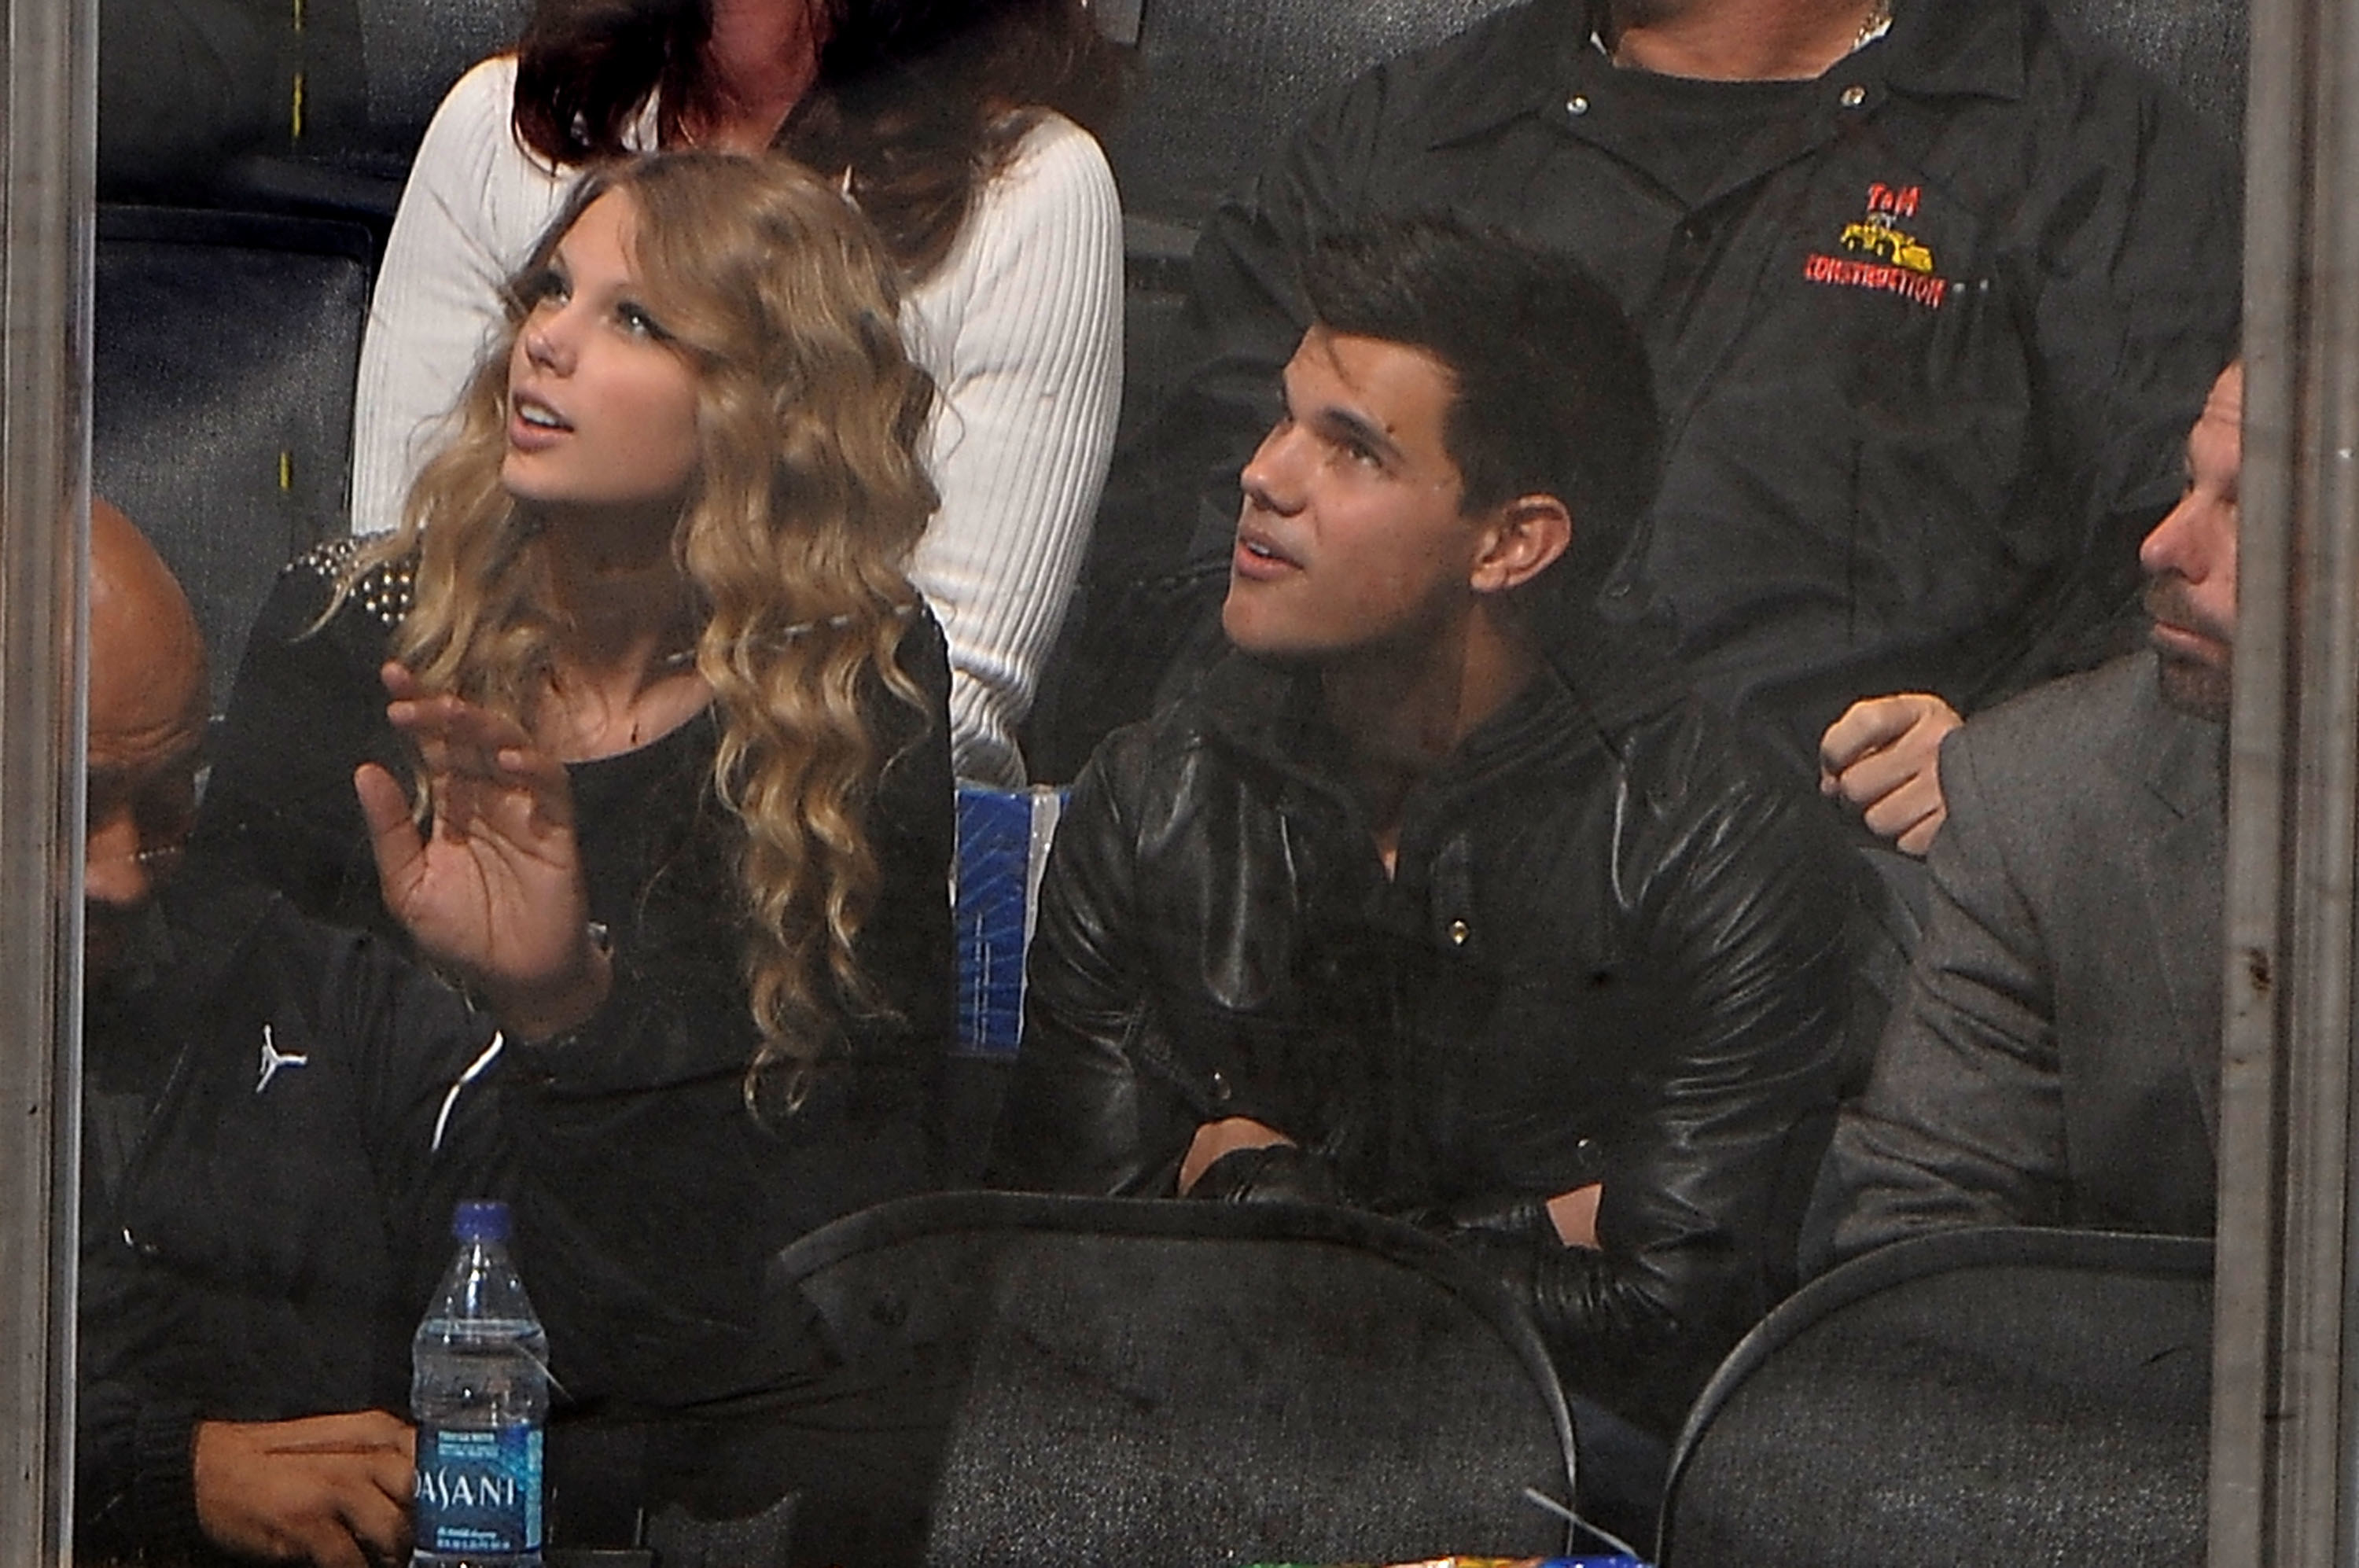 Taylor Swift and Taylor Lautner sitting next to each other at an event